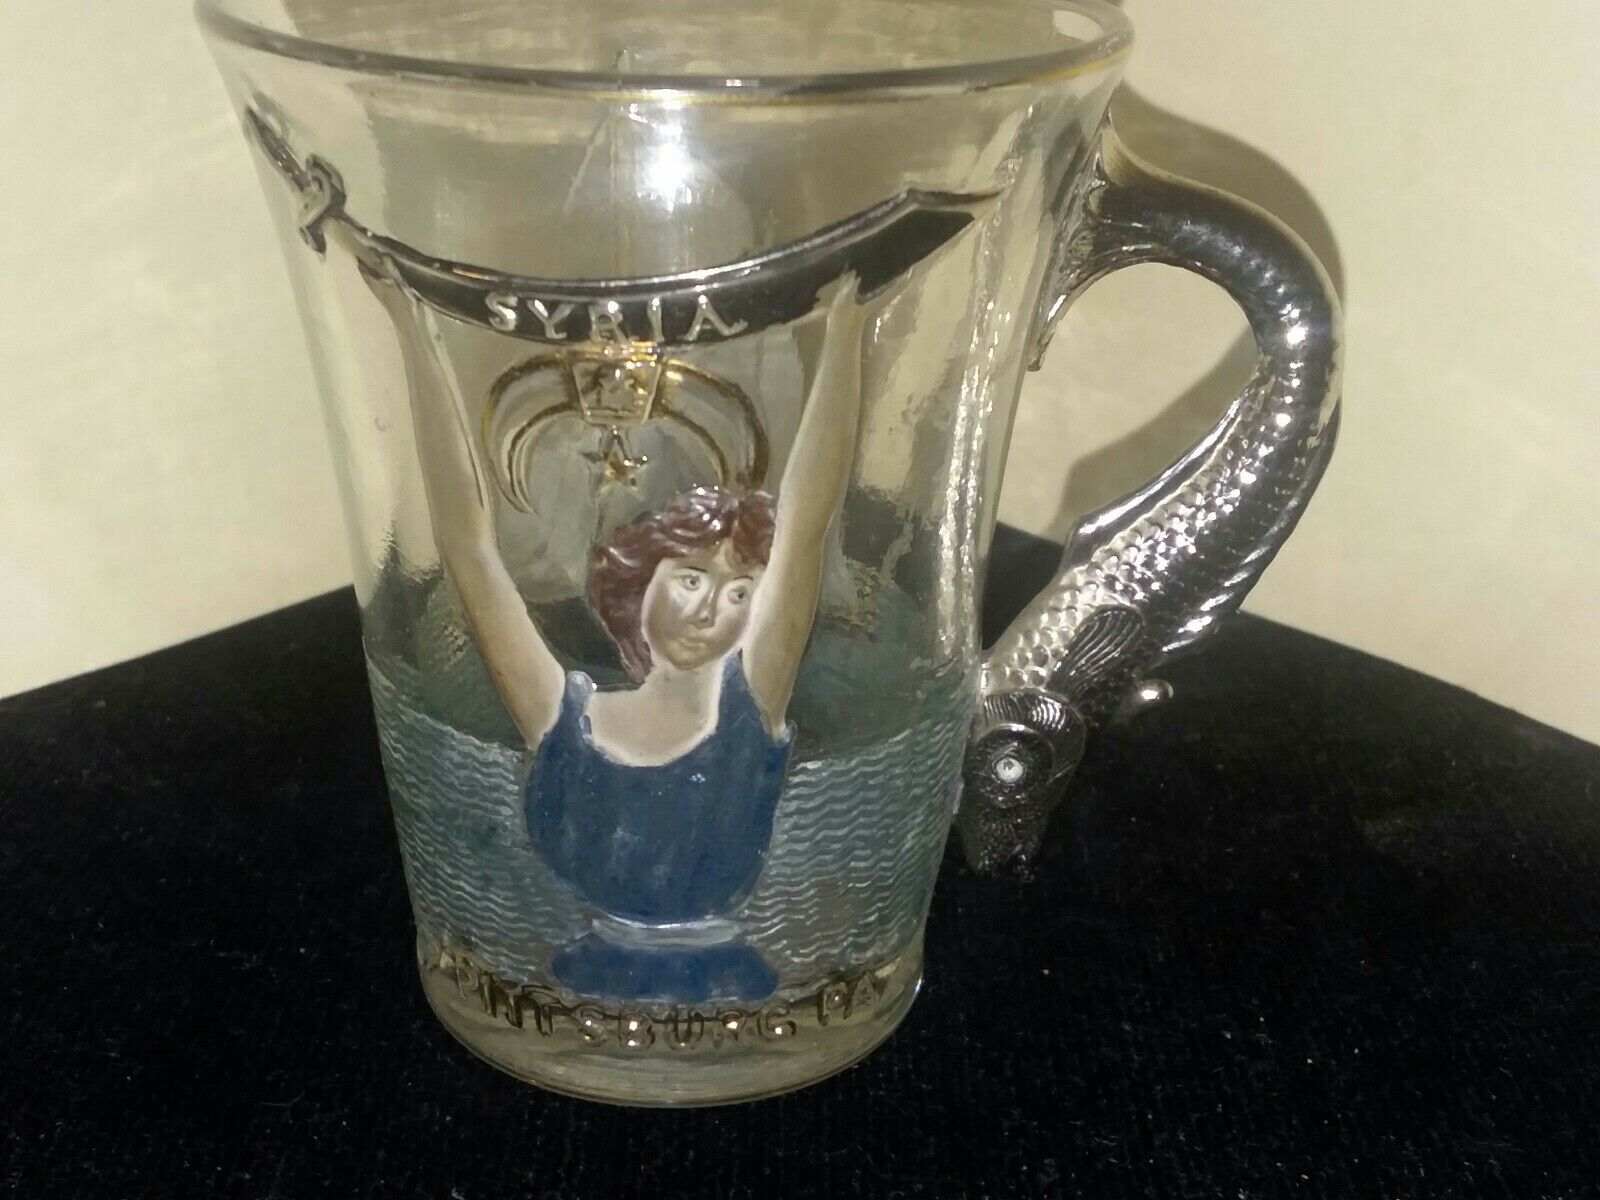 TI-027 Shriners Convention Handled Glass Cup 1904 Atlantic City Sailboat Woman